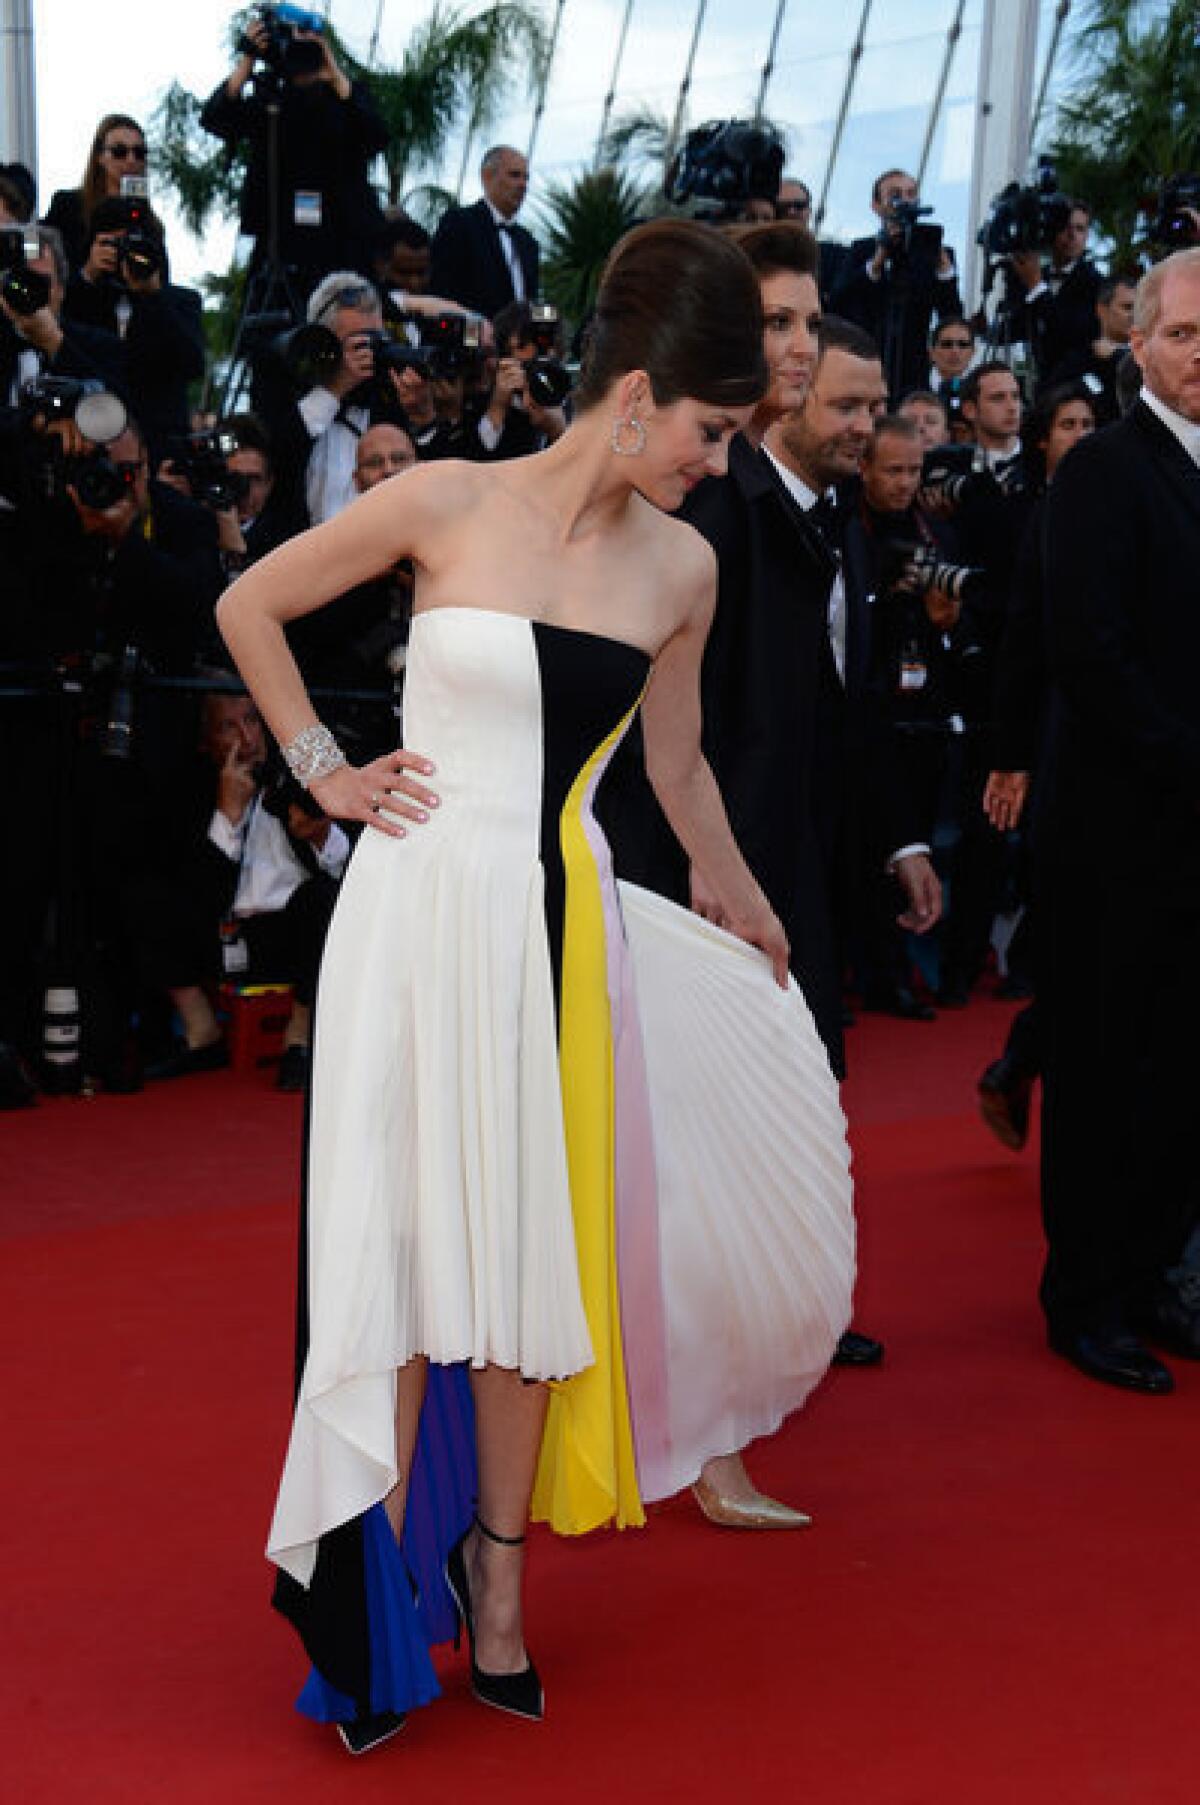 Marion Cotillard shows off her Dior gown at "Blood Ties" premiere during the 66th Annual Cannes Film Festival at the Palais des Festivals on Monday.